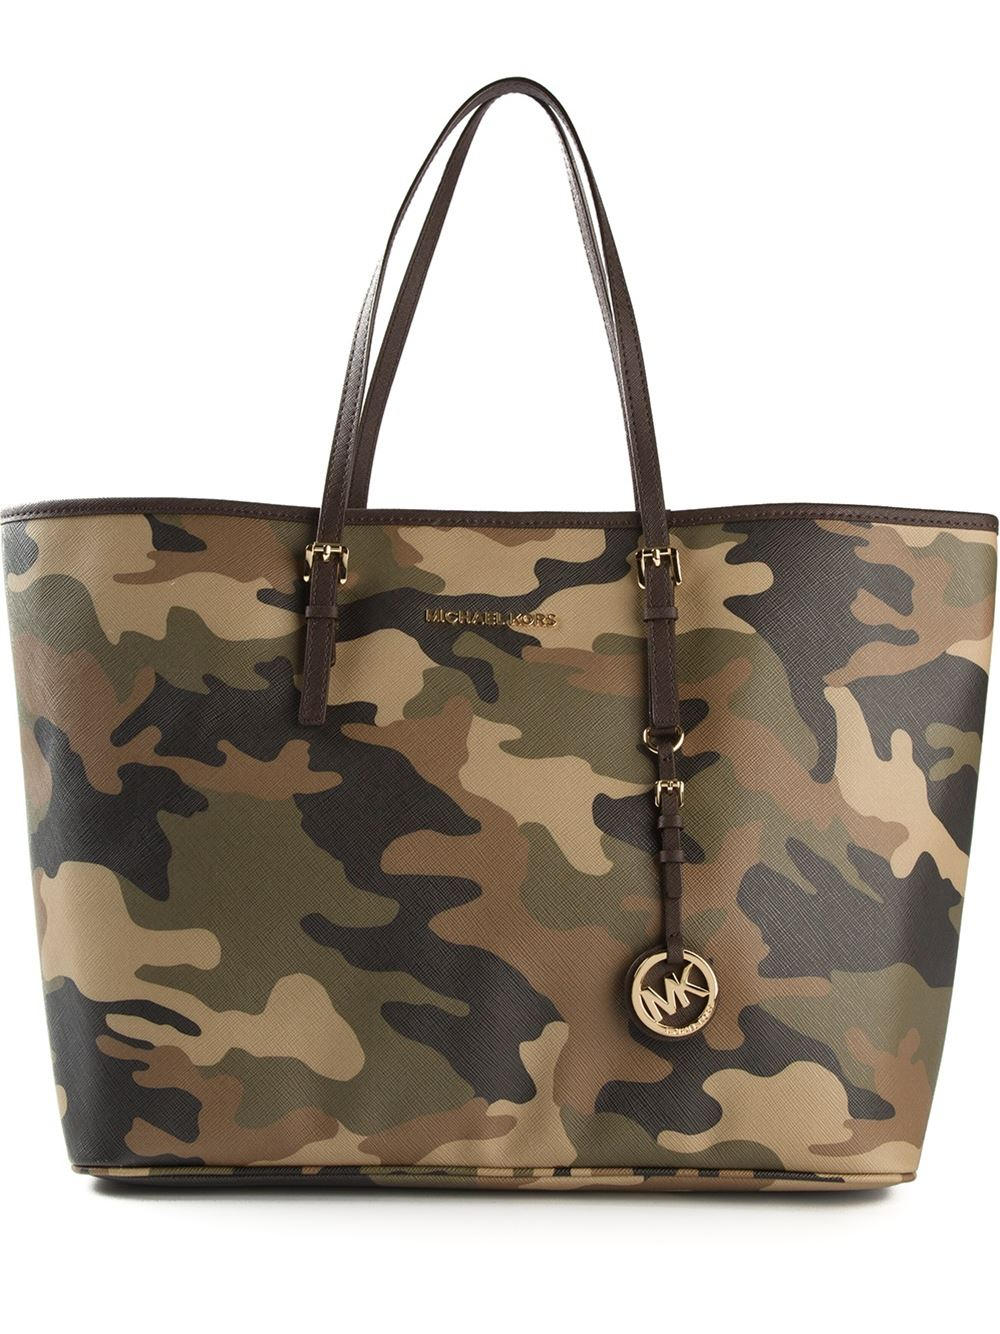 camouflage michael kors tote